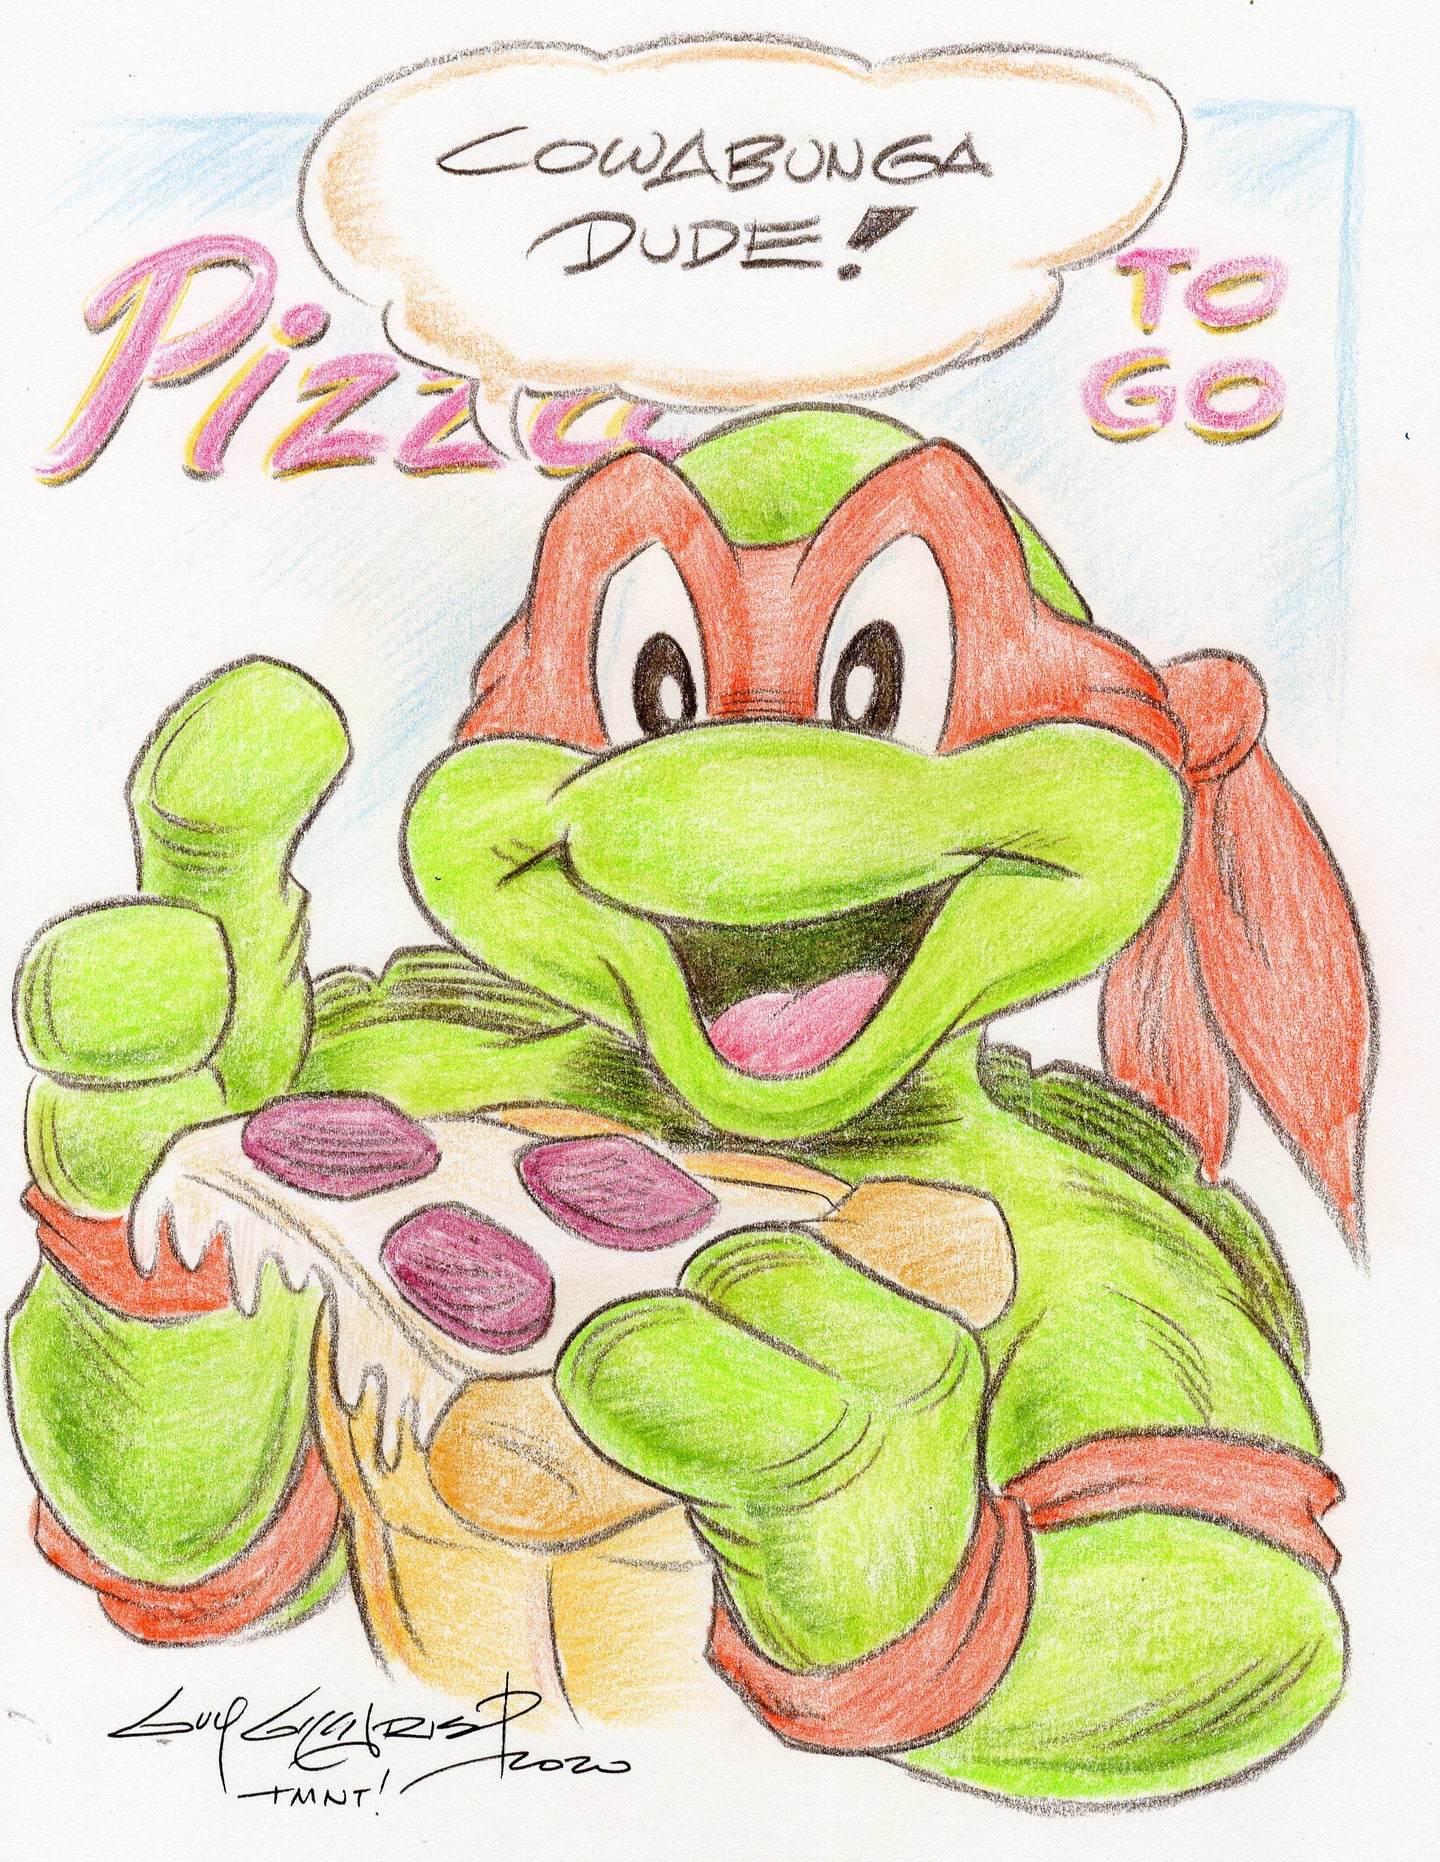 Rafael with Pizza original 1/1 8.5 x 11 Sketch- Created by Guy Gilchrist